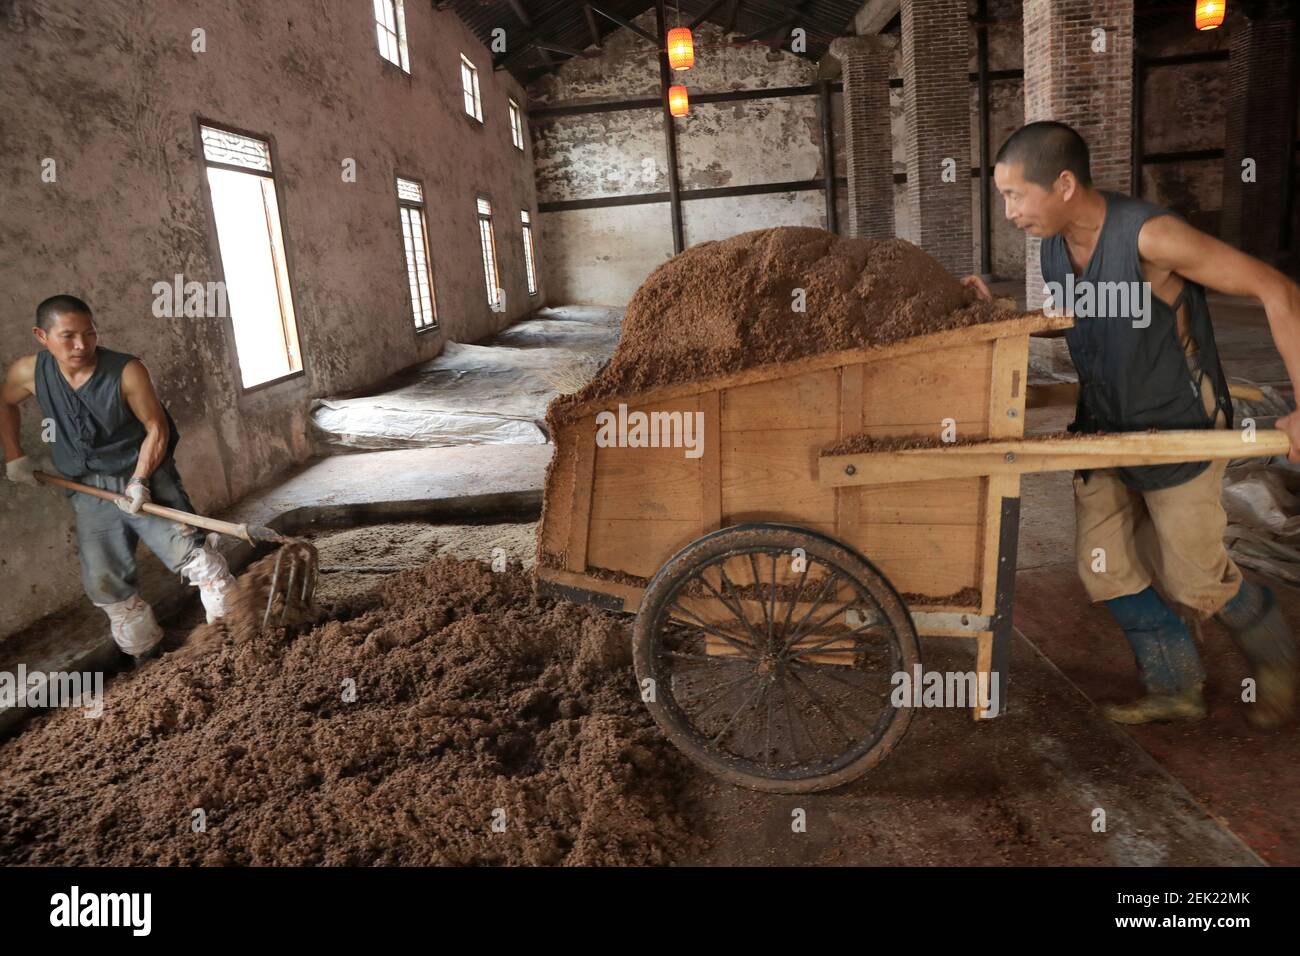 JInagsuï¼ŒCHINA-On May 7, 2020, in the yisheng century-old cellar pool and brewing workshop located in changle town, haimen, jiangsu province, the brewing workers followed the traditional craft brewing process, mixing fermented grains with distillers' grains, hauling distillers' grains, steaming liquor on the steamer, and brewing the original liquor.(EDITORIAL USE ONLY. CHINA OUT) (Photo by /Sipa USA) Stock Photo